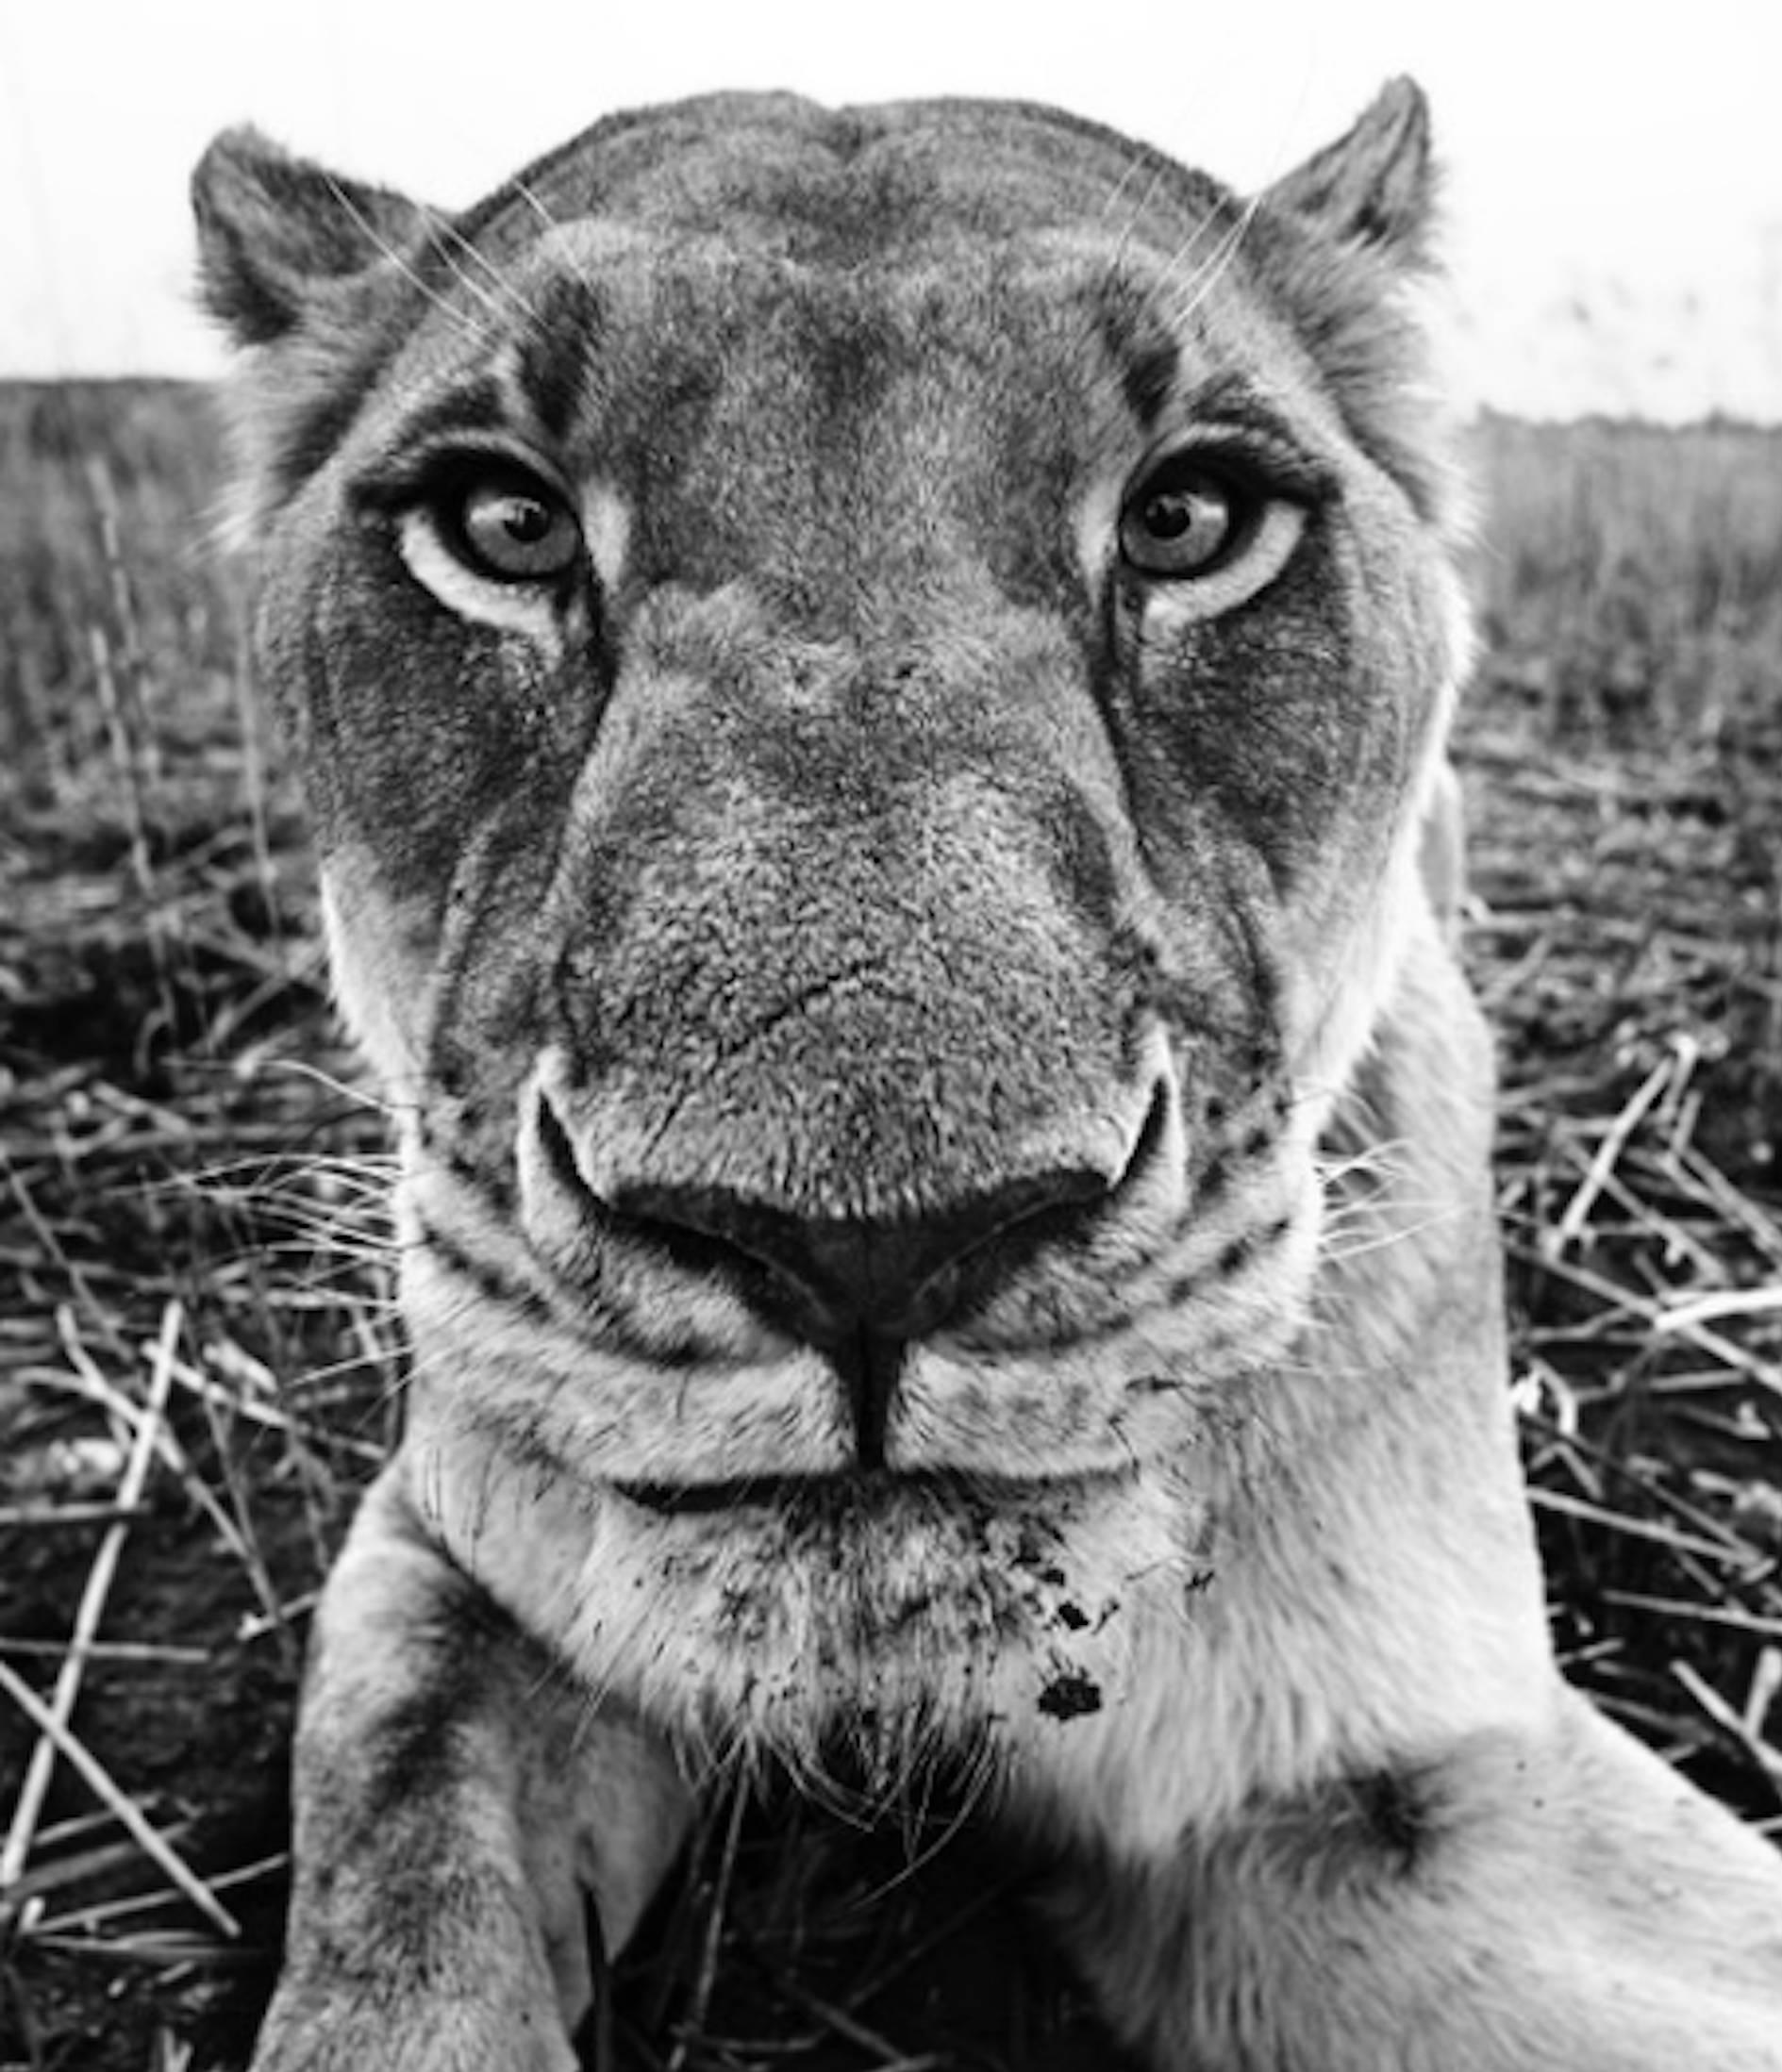 David Yarrow Black and White Photograph - The Hunger Games